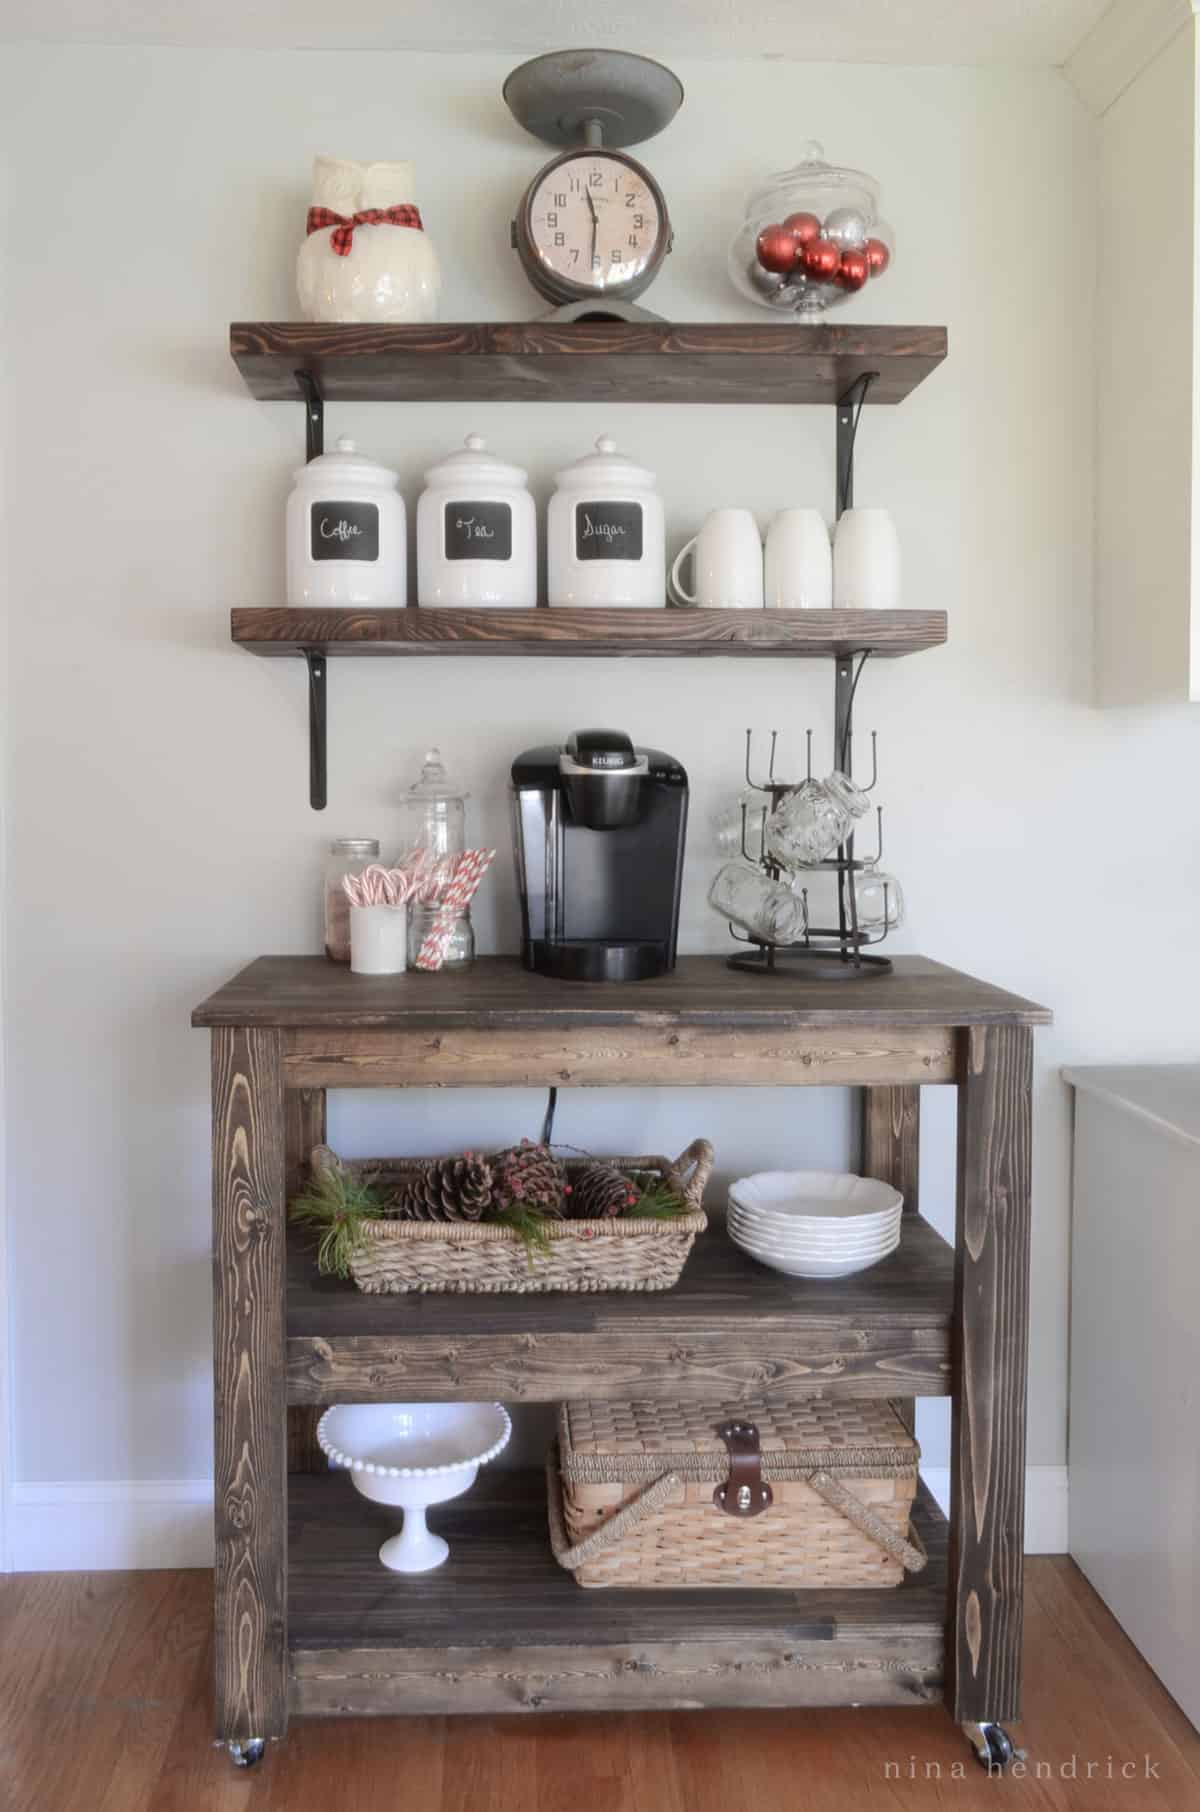 Rustic DIY coffee bar cart with wooden shelves